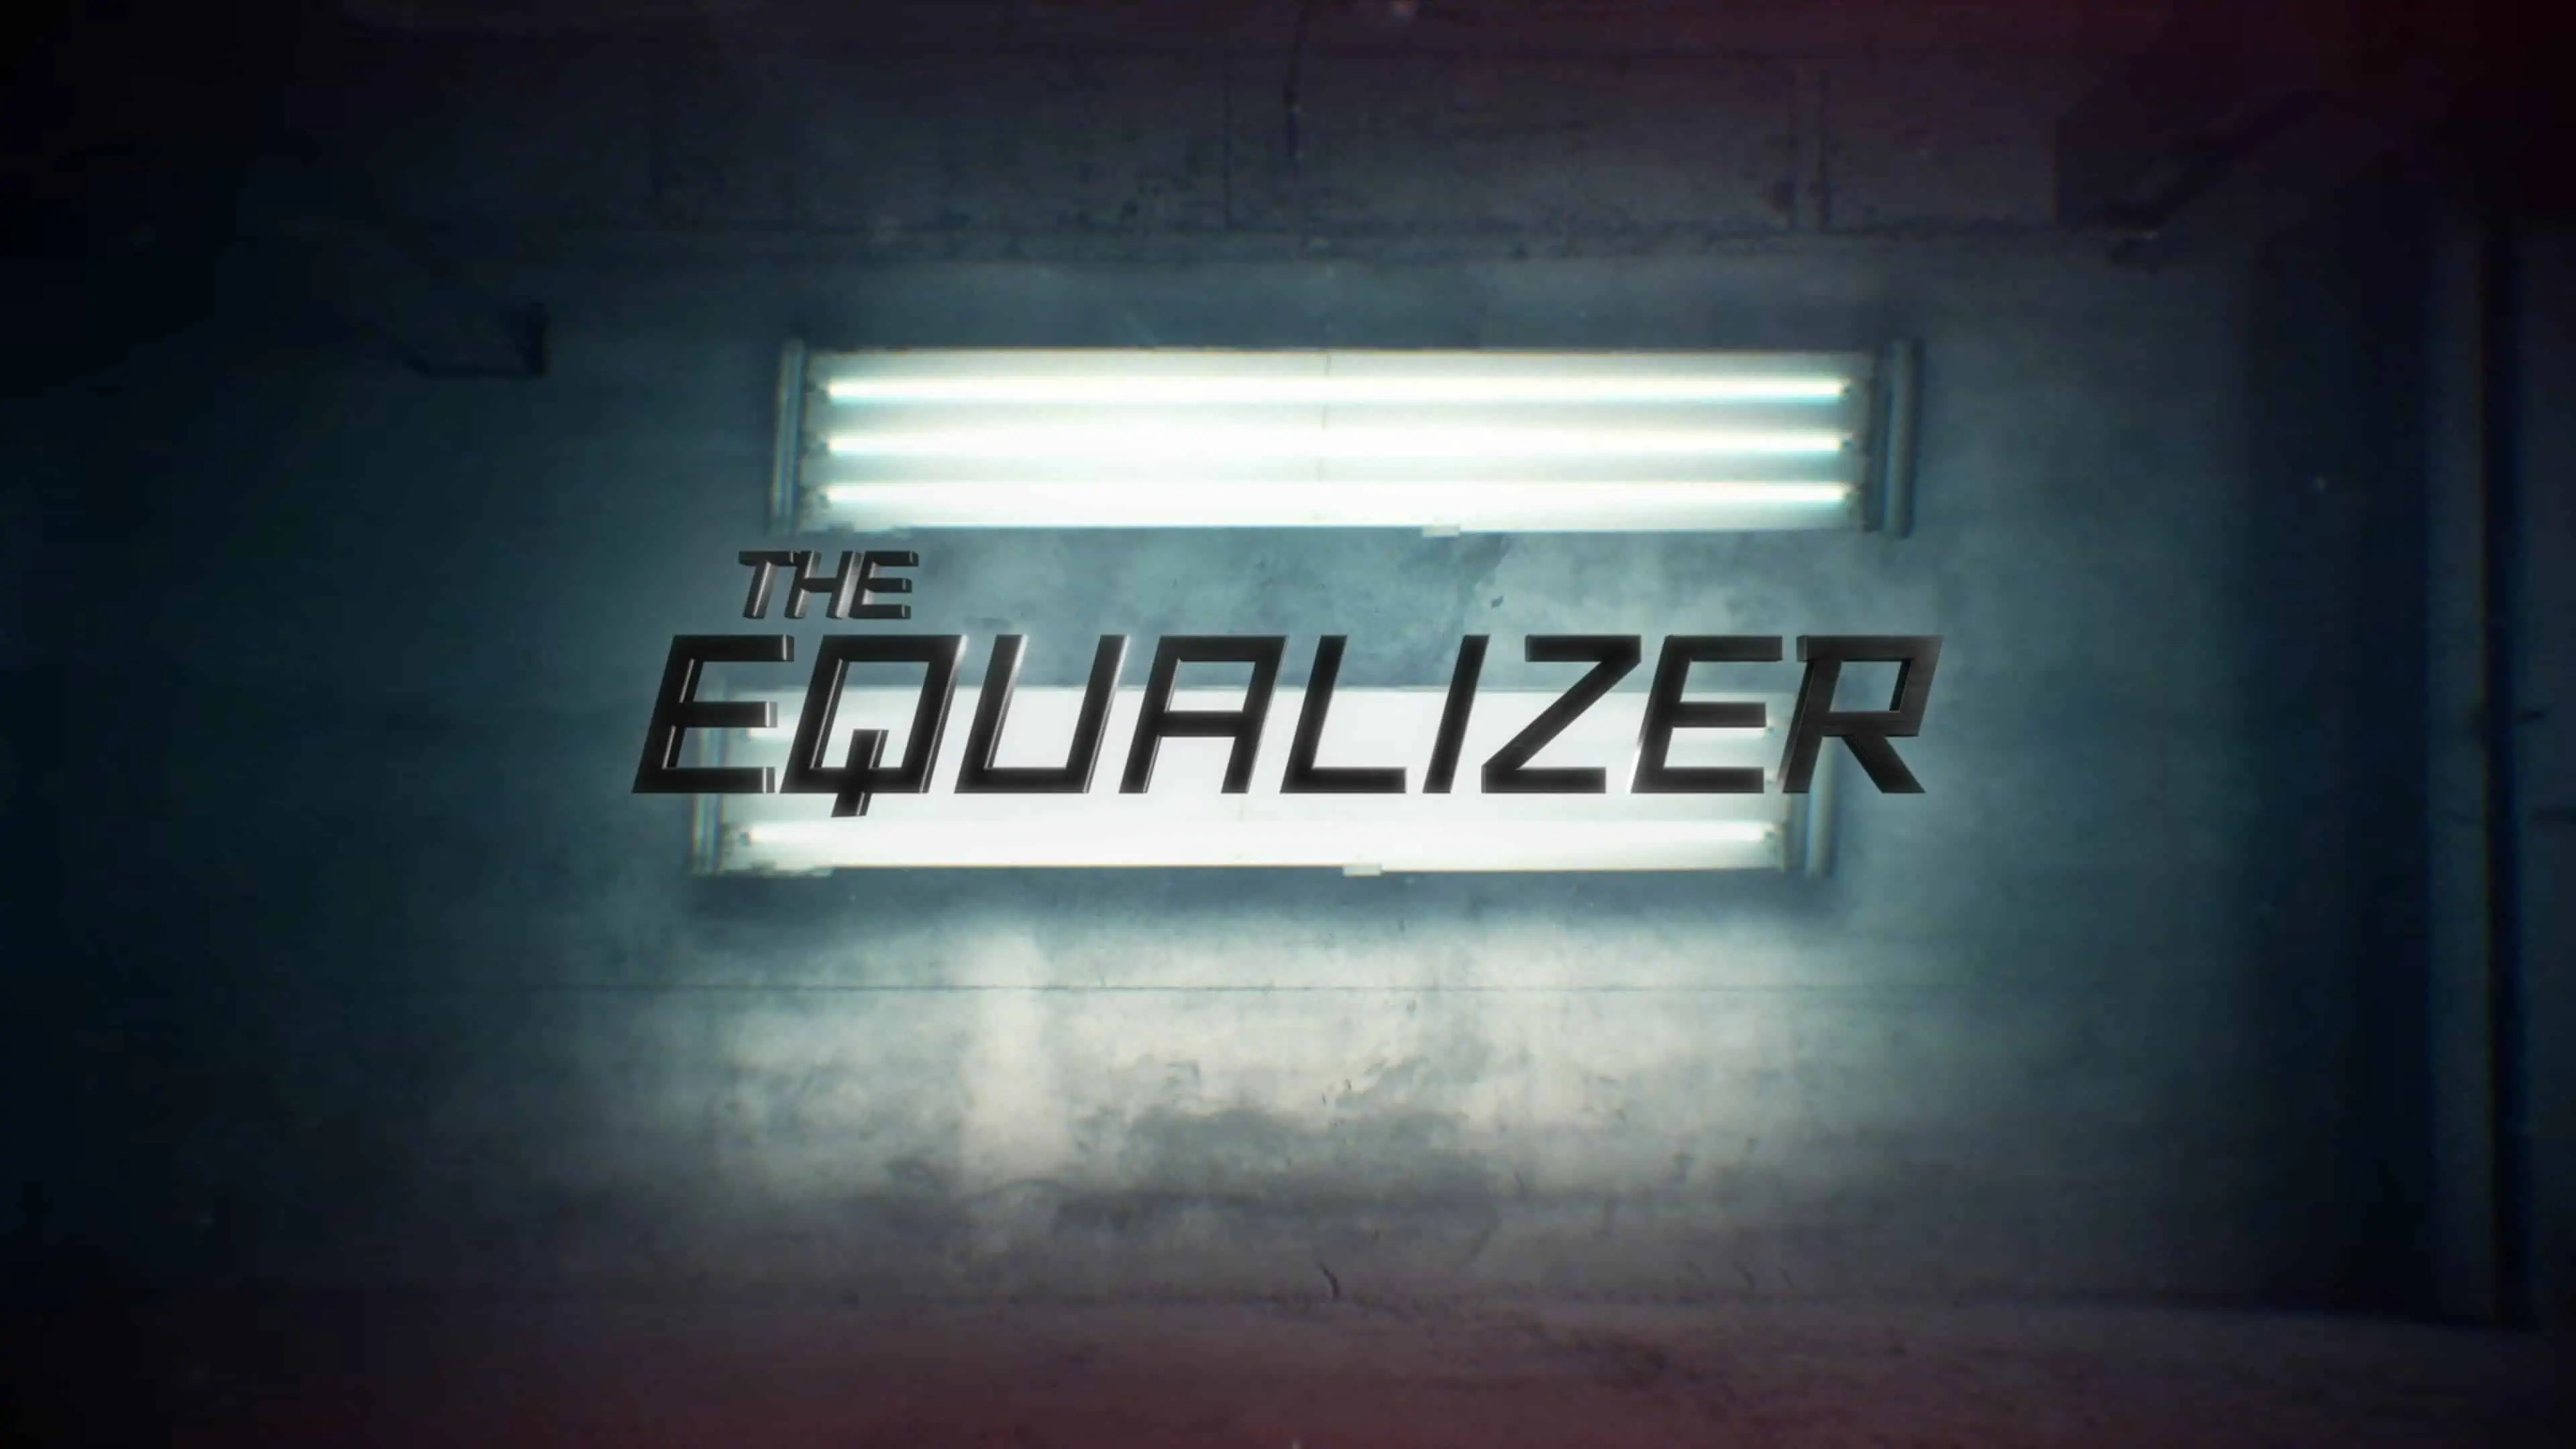 The Equalizer: Season 2/ Episode 16 “Vox Populi” – Recap/ Review (with Spoilers)